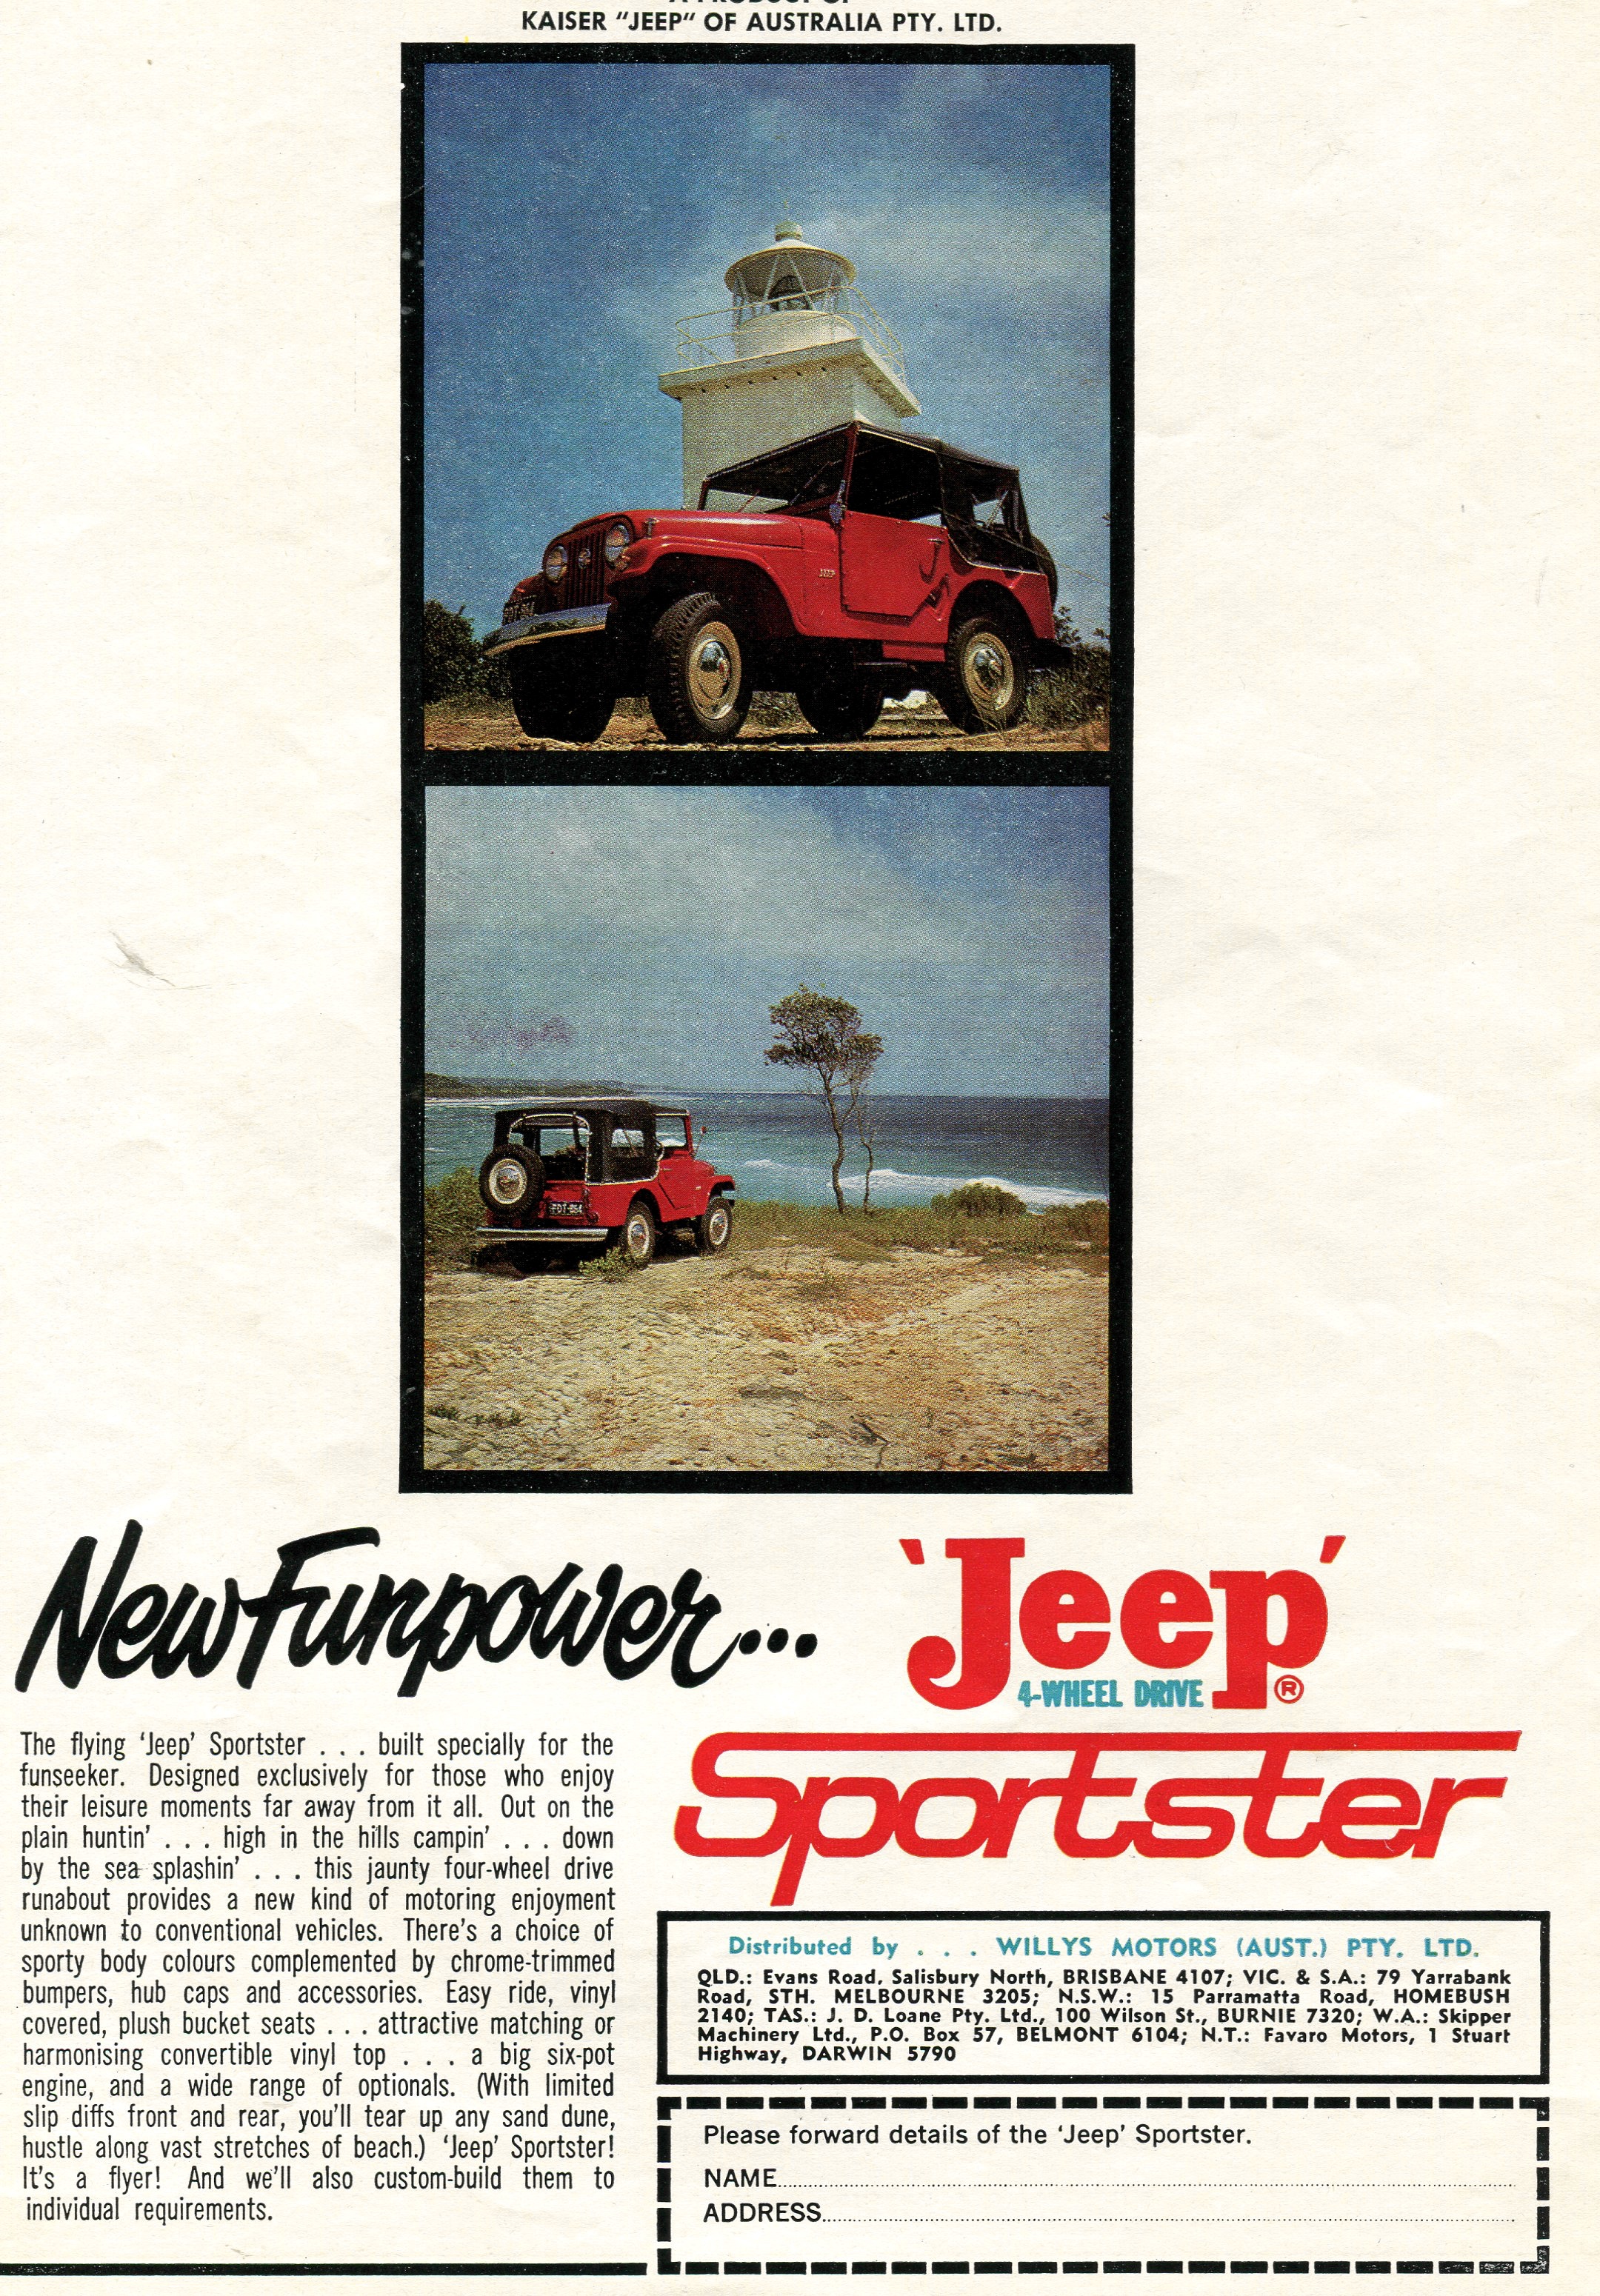 1968 Jeep Sportster